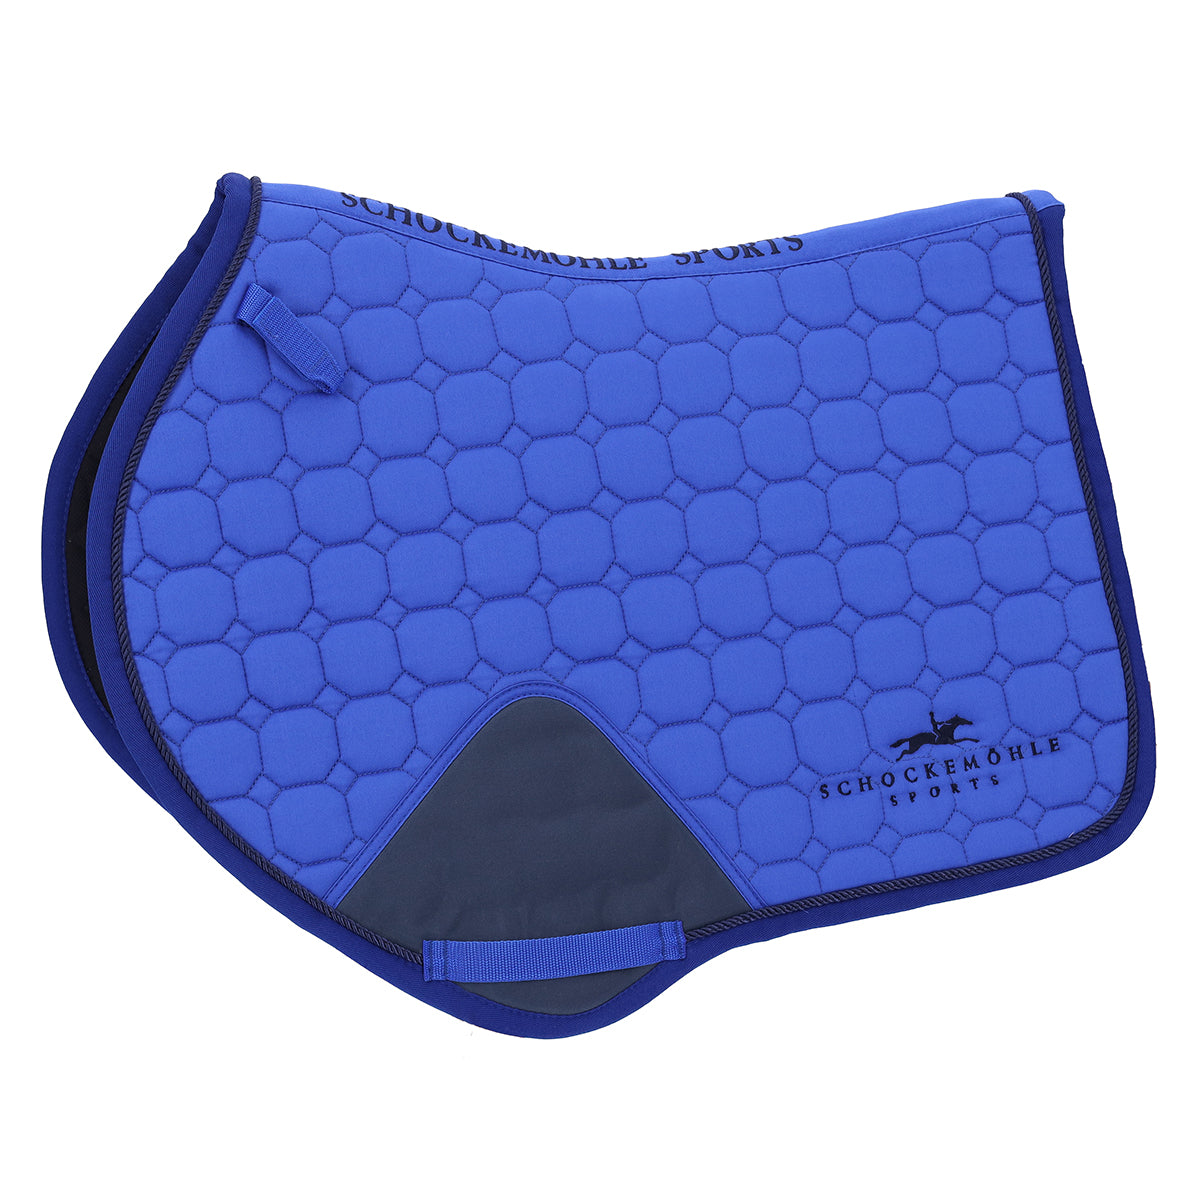 Schockemohle Sports New Power Pad Jumping AW23